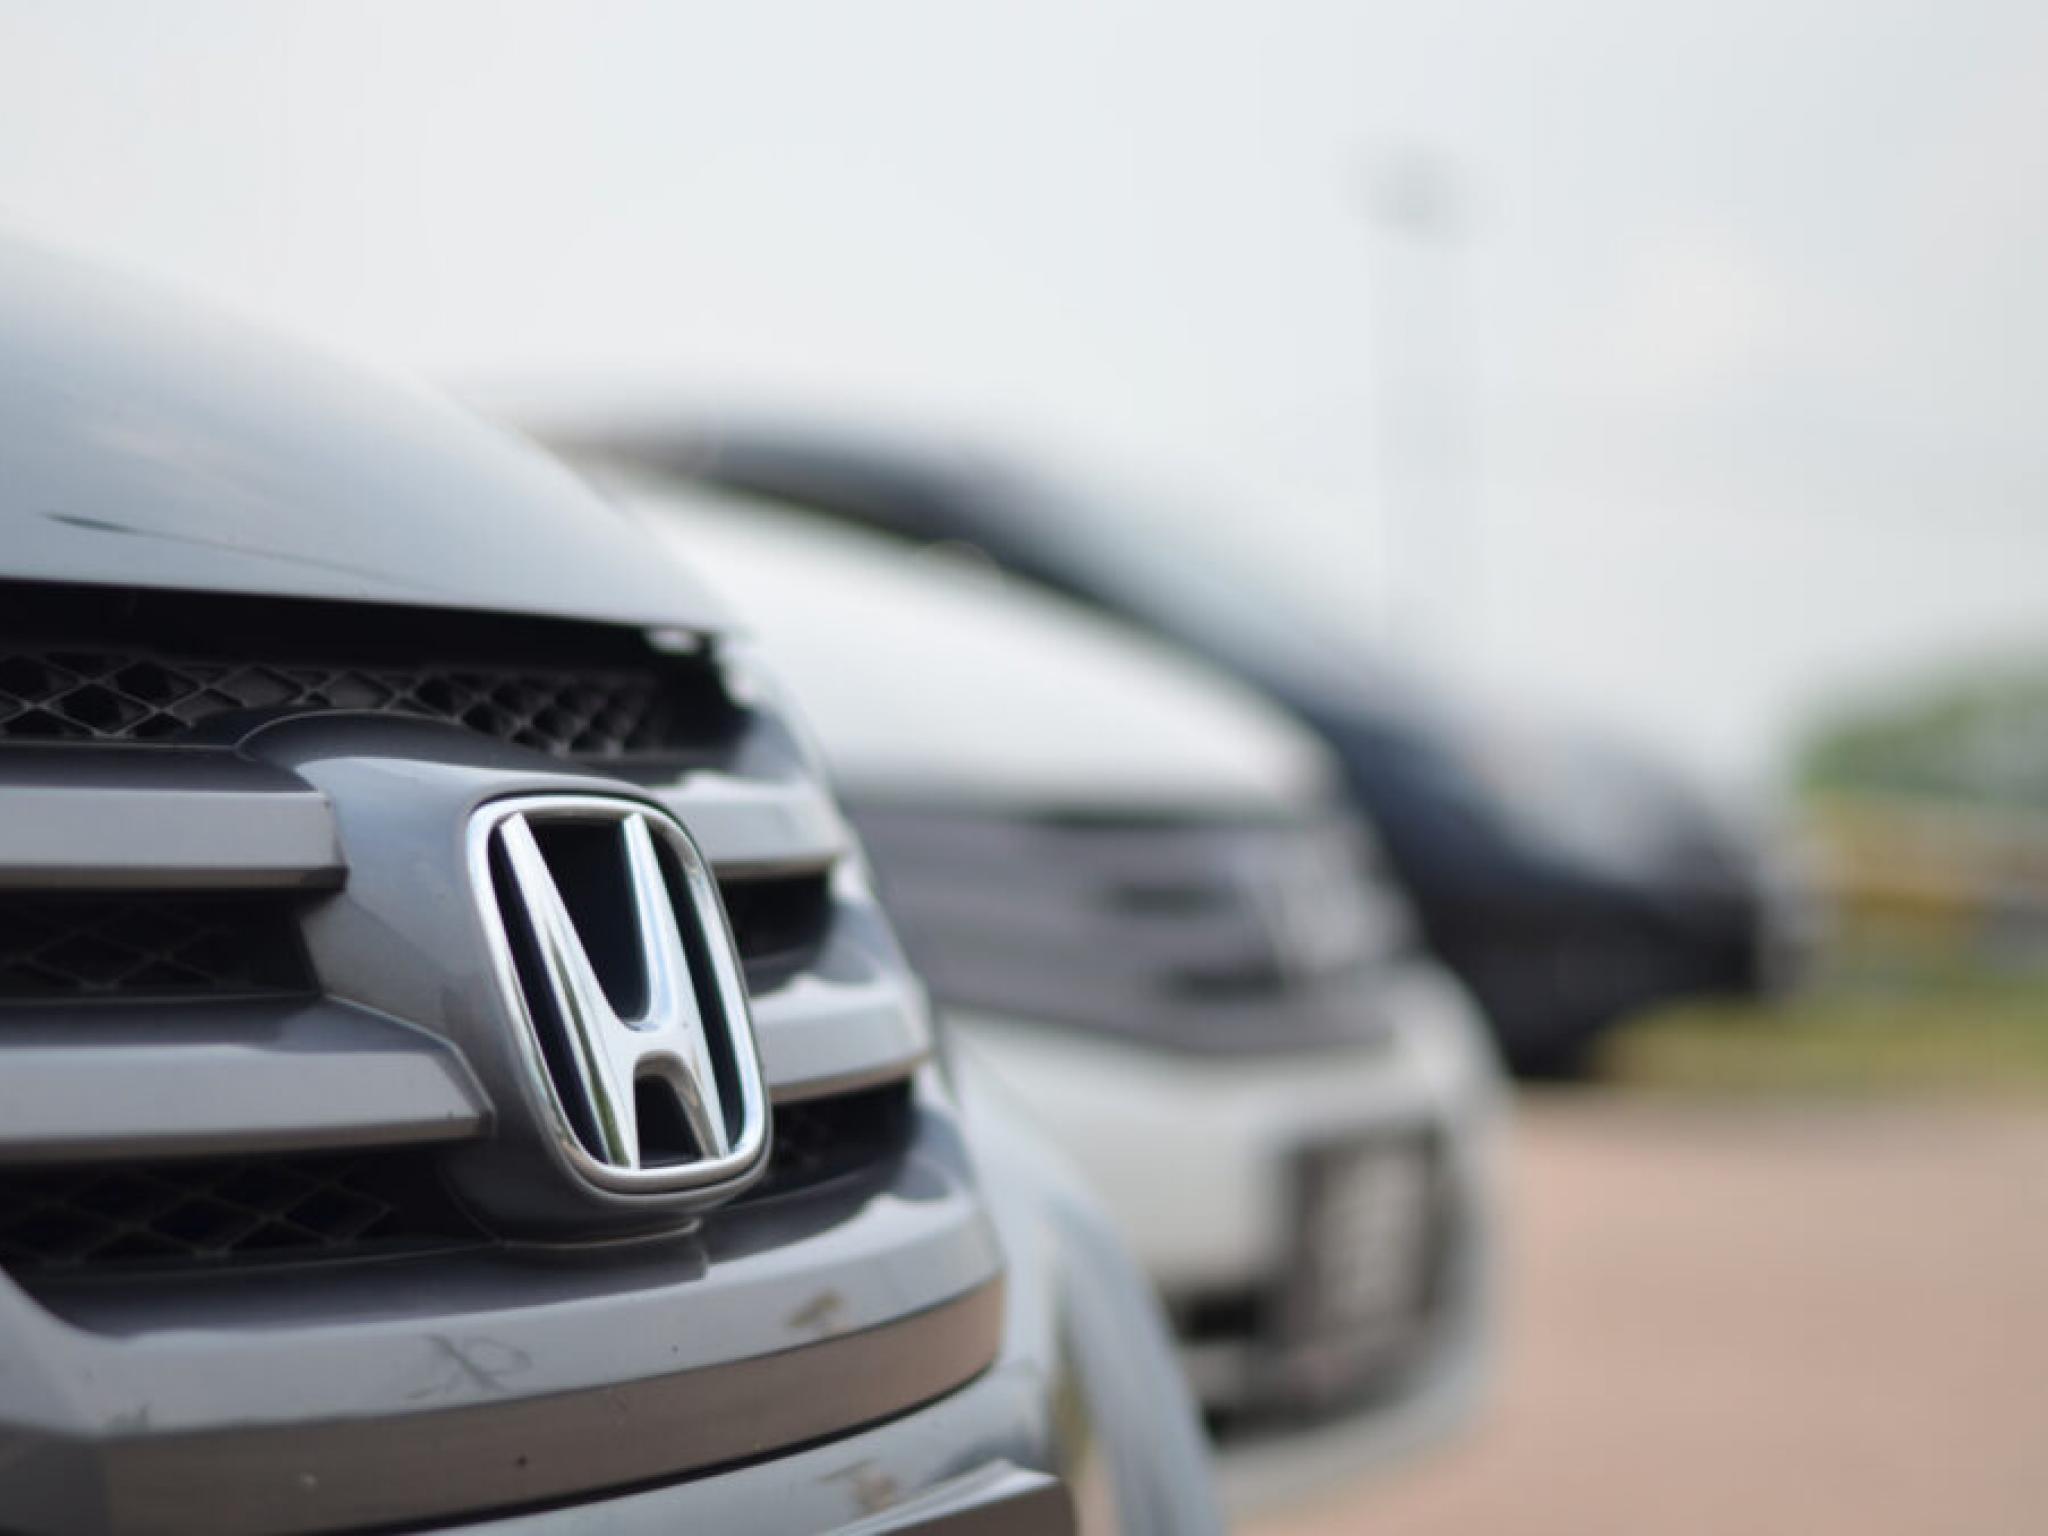  honda-faces-union-busting-allegations-at-indiana-plant-updated 